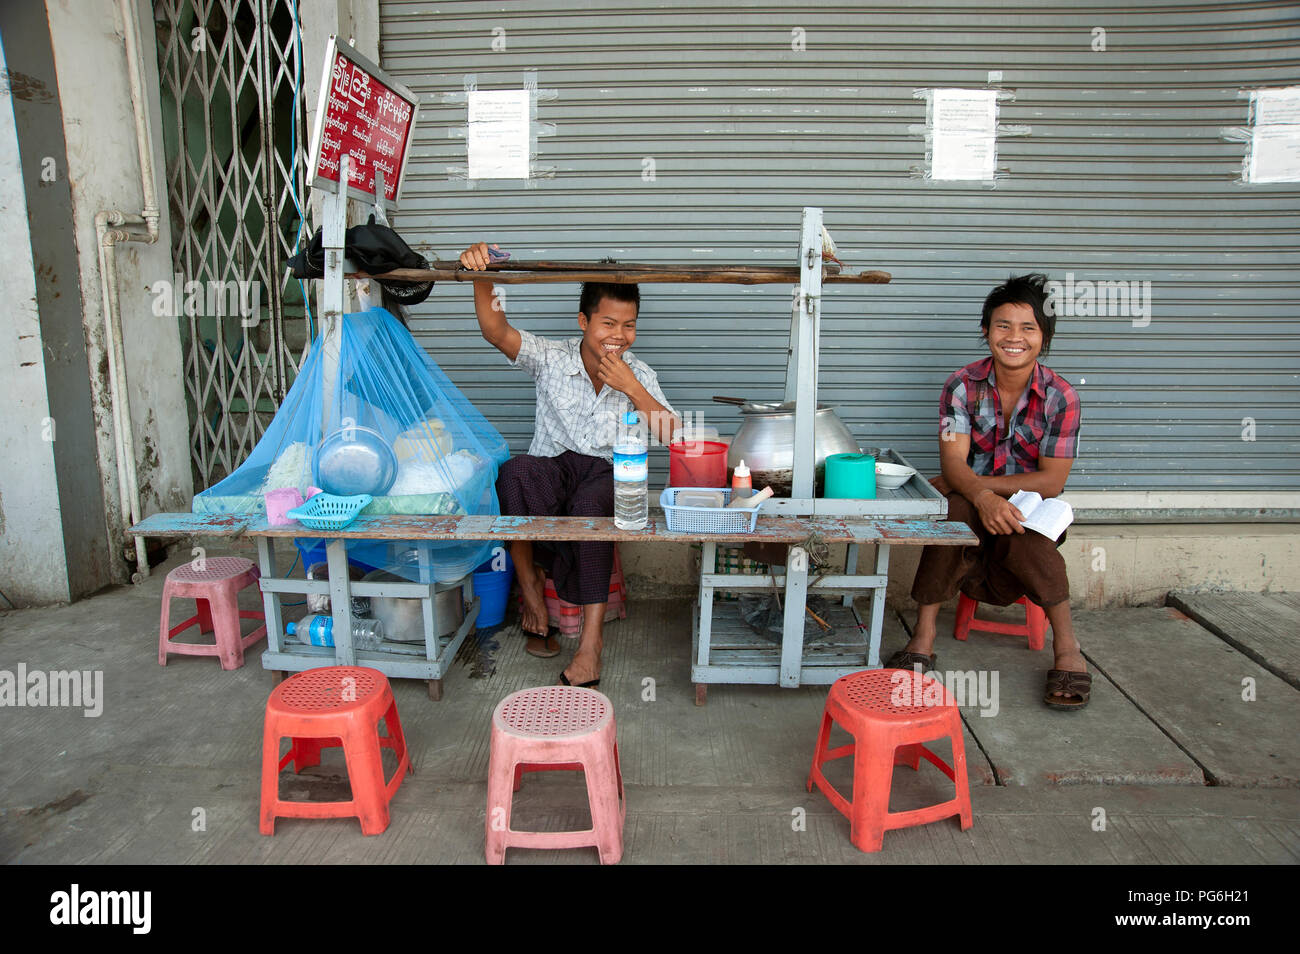 Two young laughing Burmese boys sit behind their mobile street food kitchen on a Yangon street Stock Photo